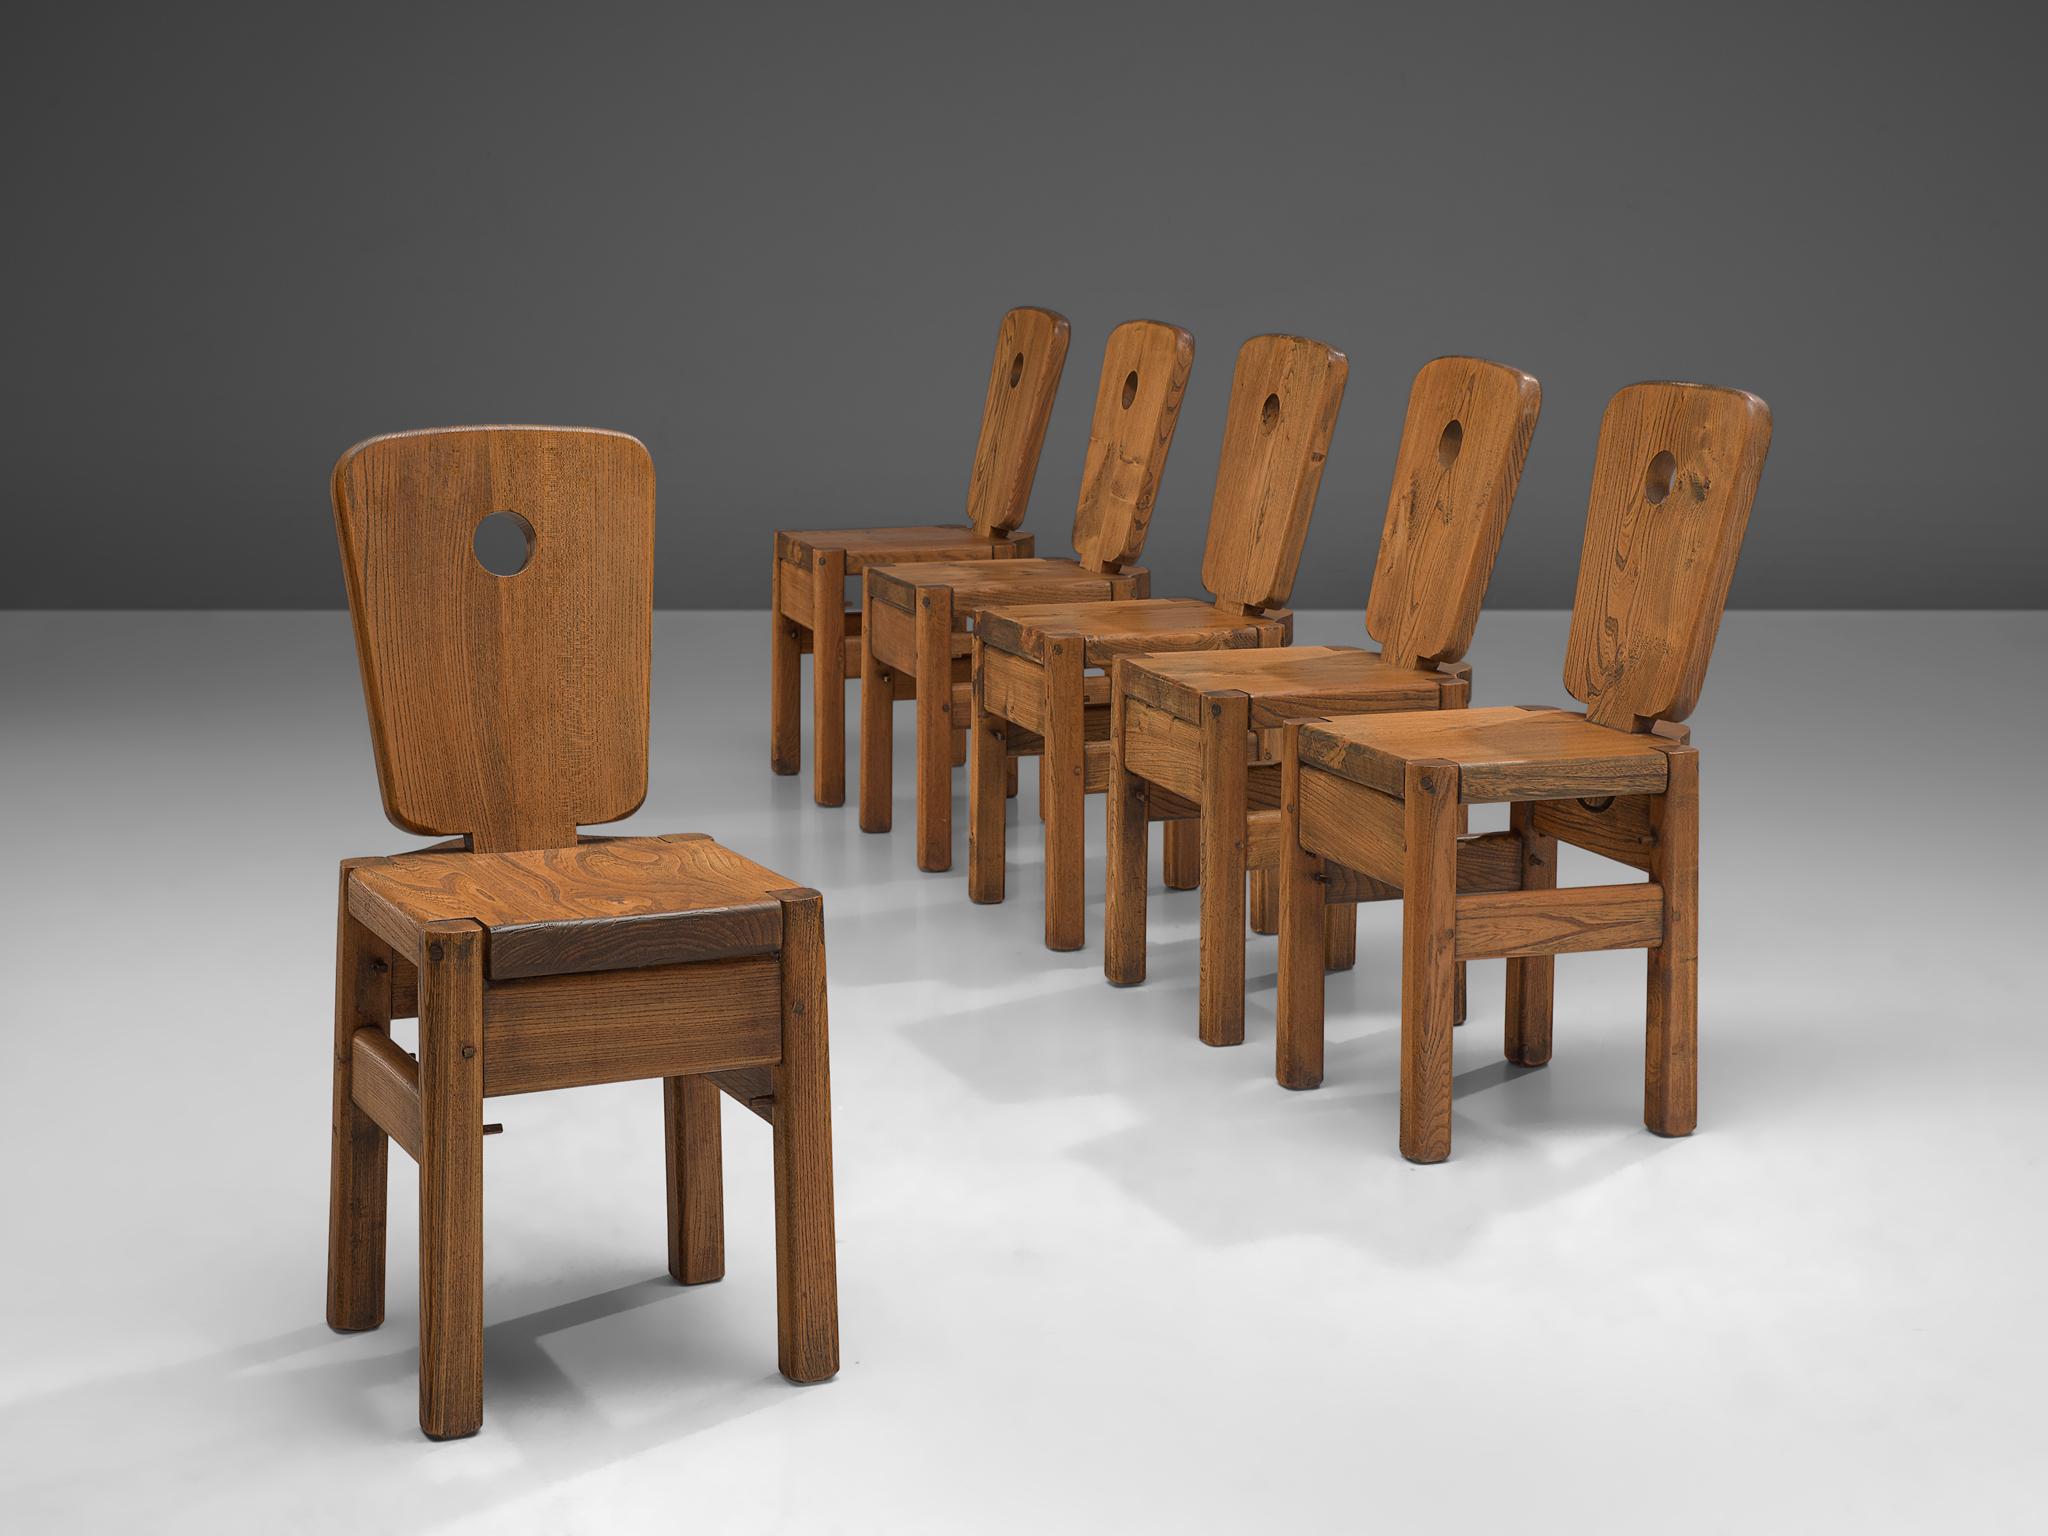 Set of 6 dining chairs, oak, The Netherlands, 1960.

Robust set of chairs are executed in aged, solid oak. The chairs have a very solid and geometric backrest. The chairs are both functional and clear in their design, as is common of most Dutch